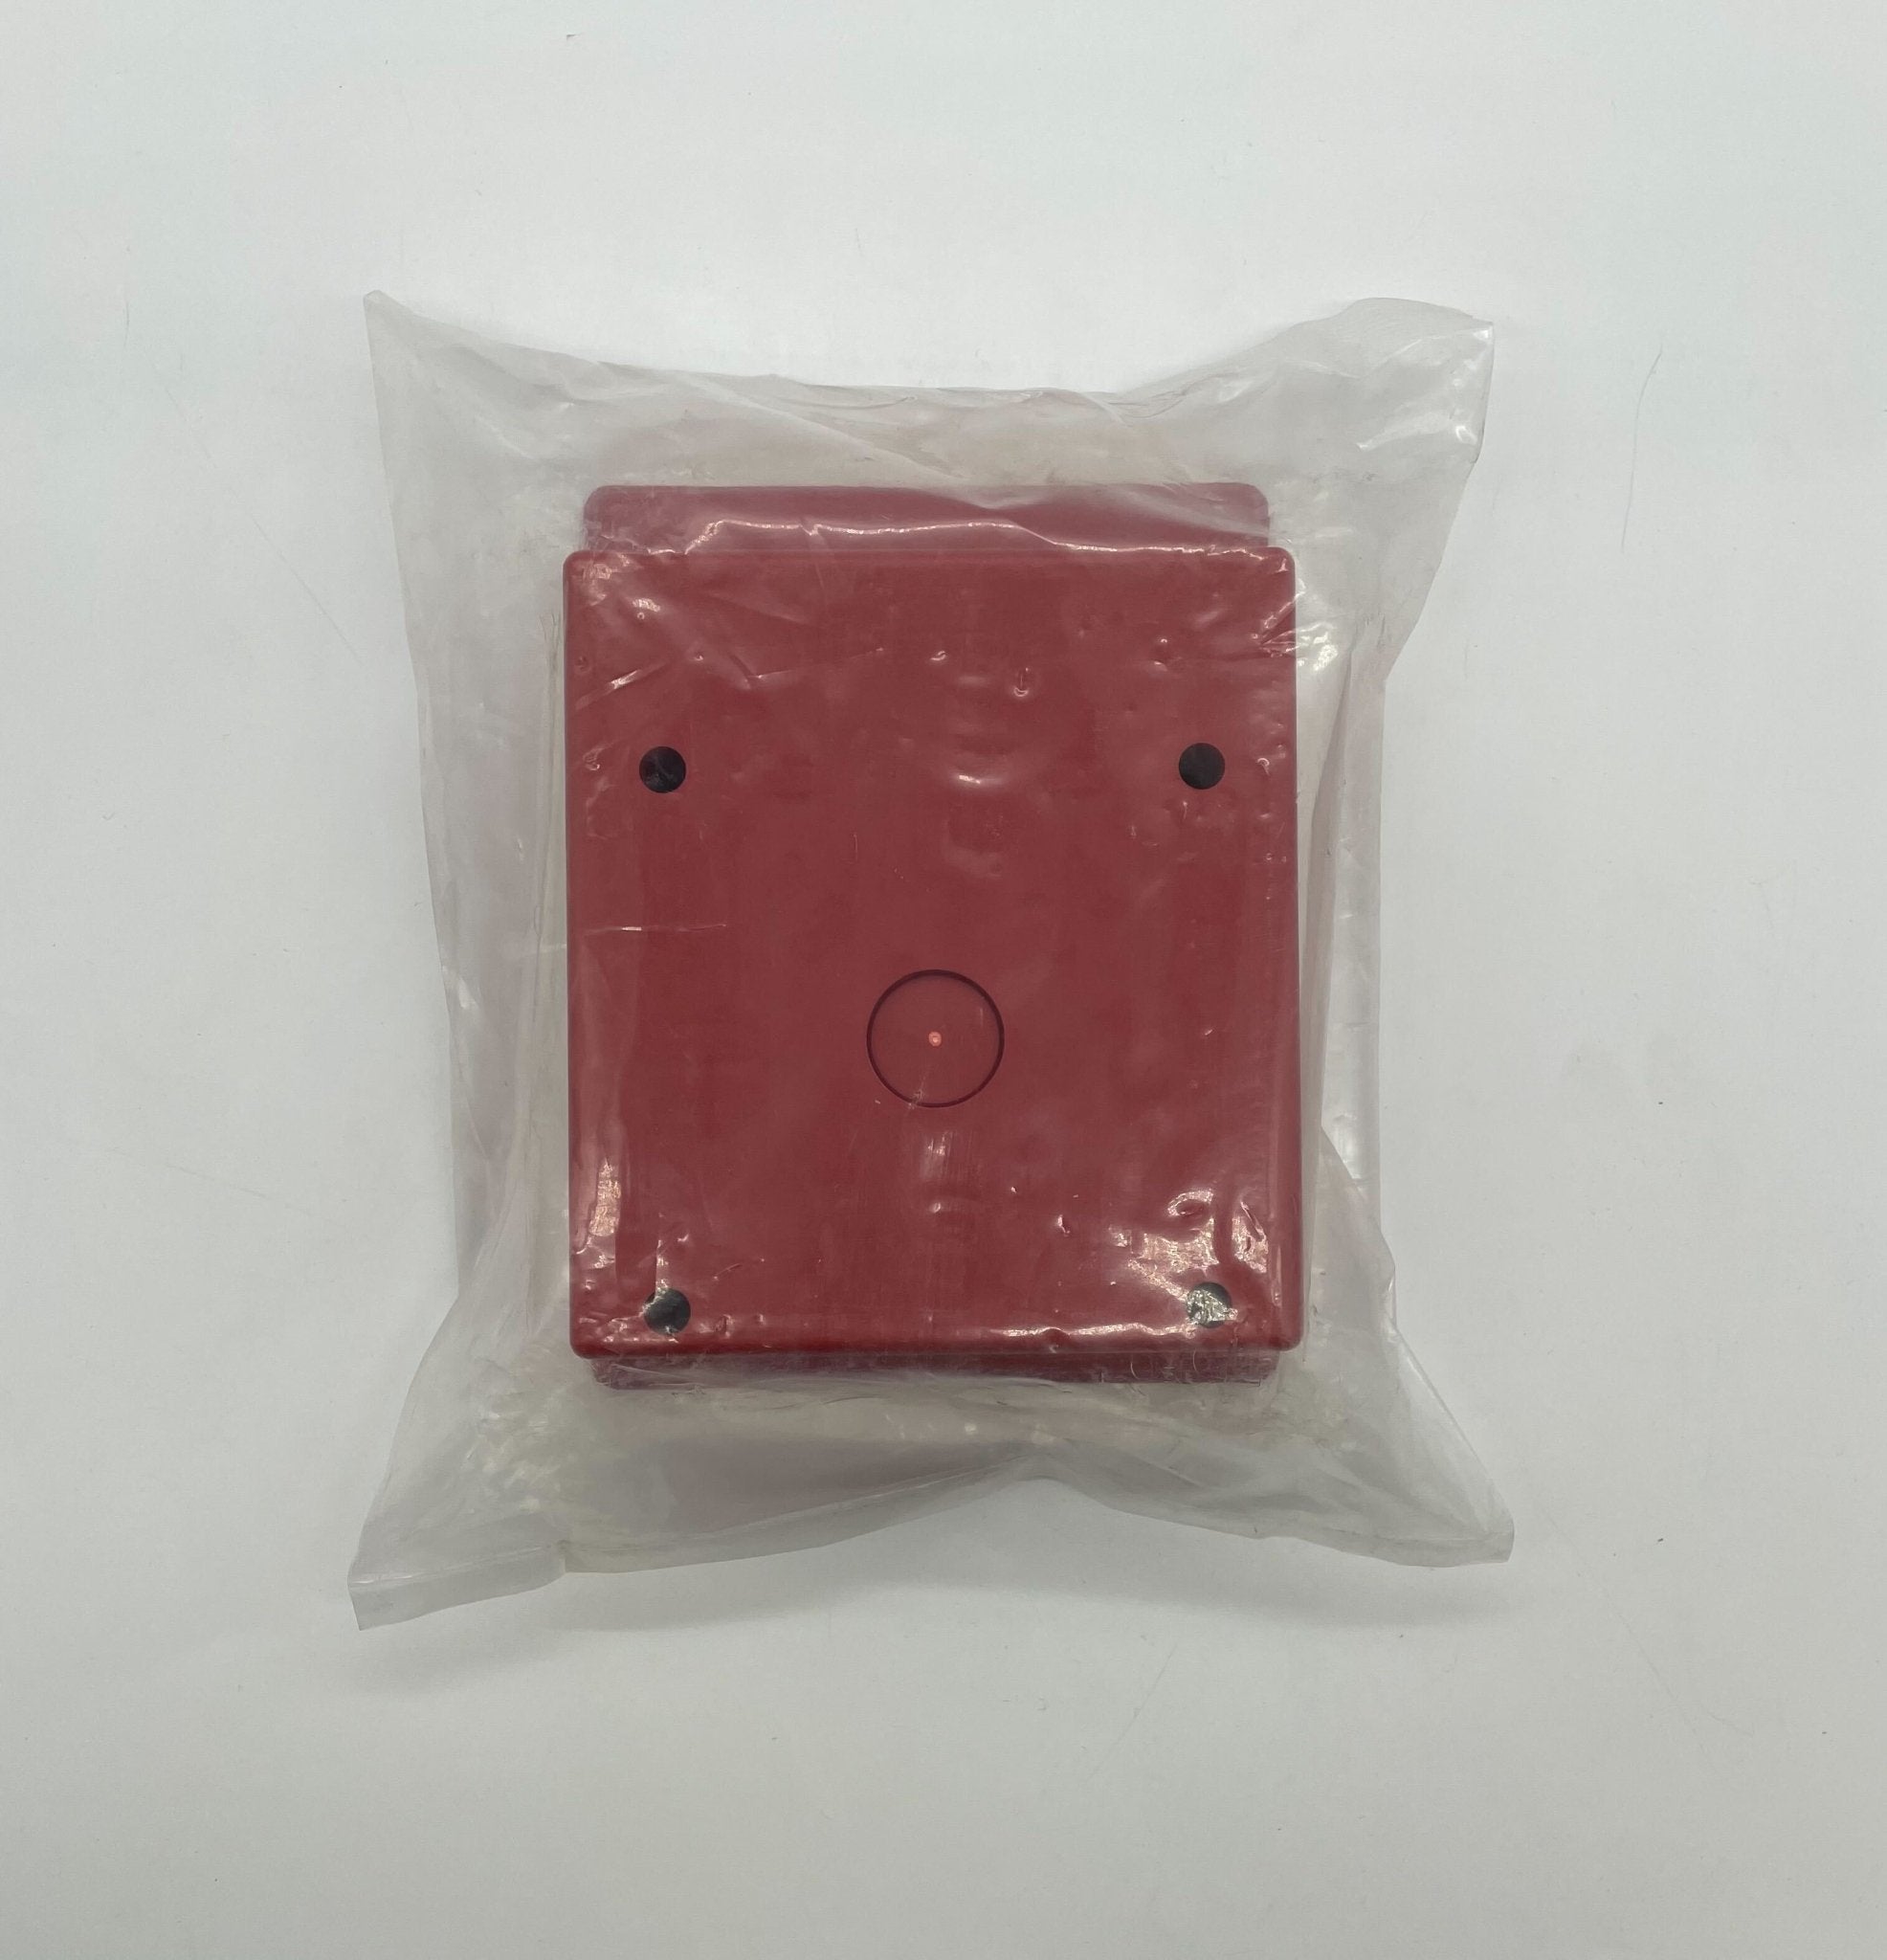 Edwards G4RB - The Fire Alarm Supplier